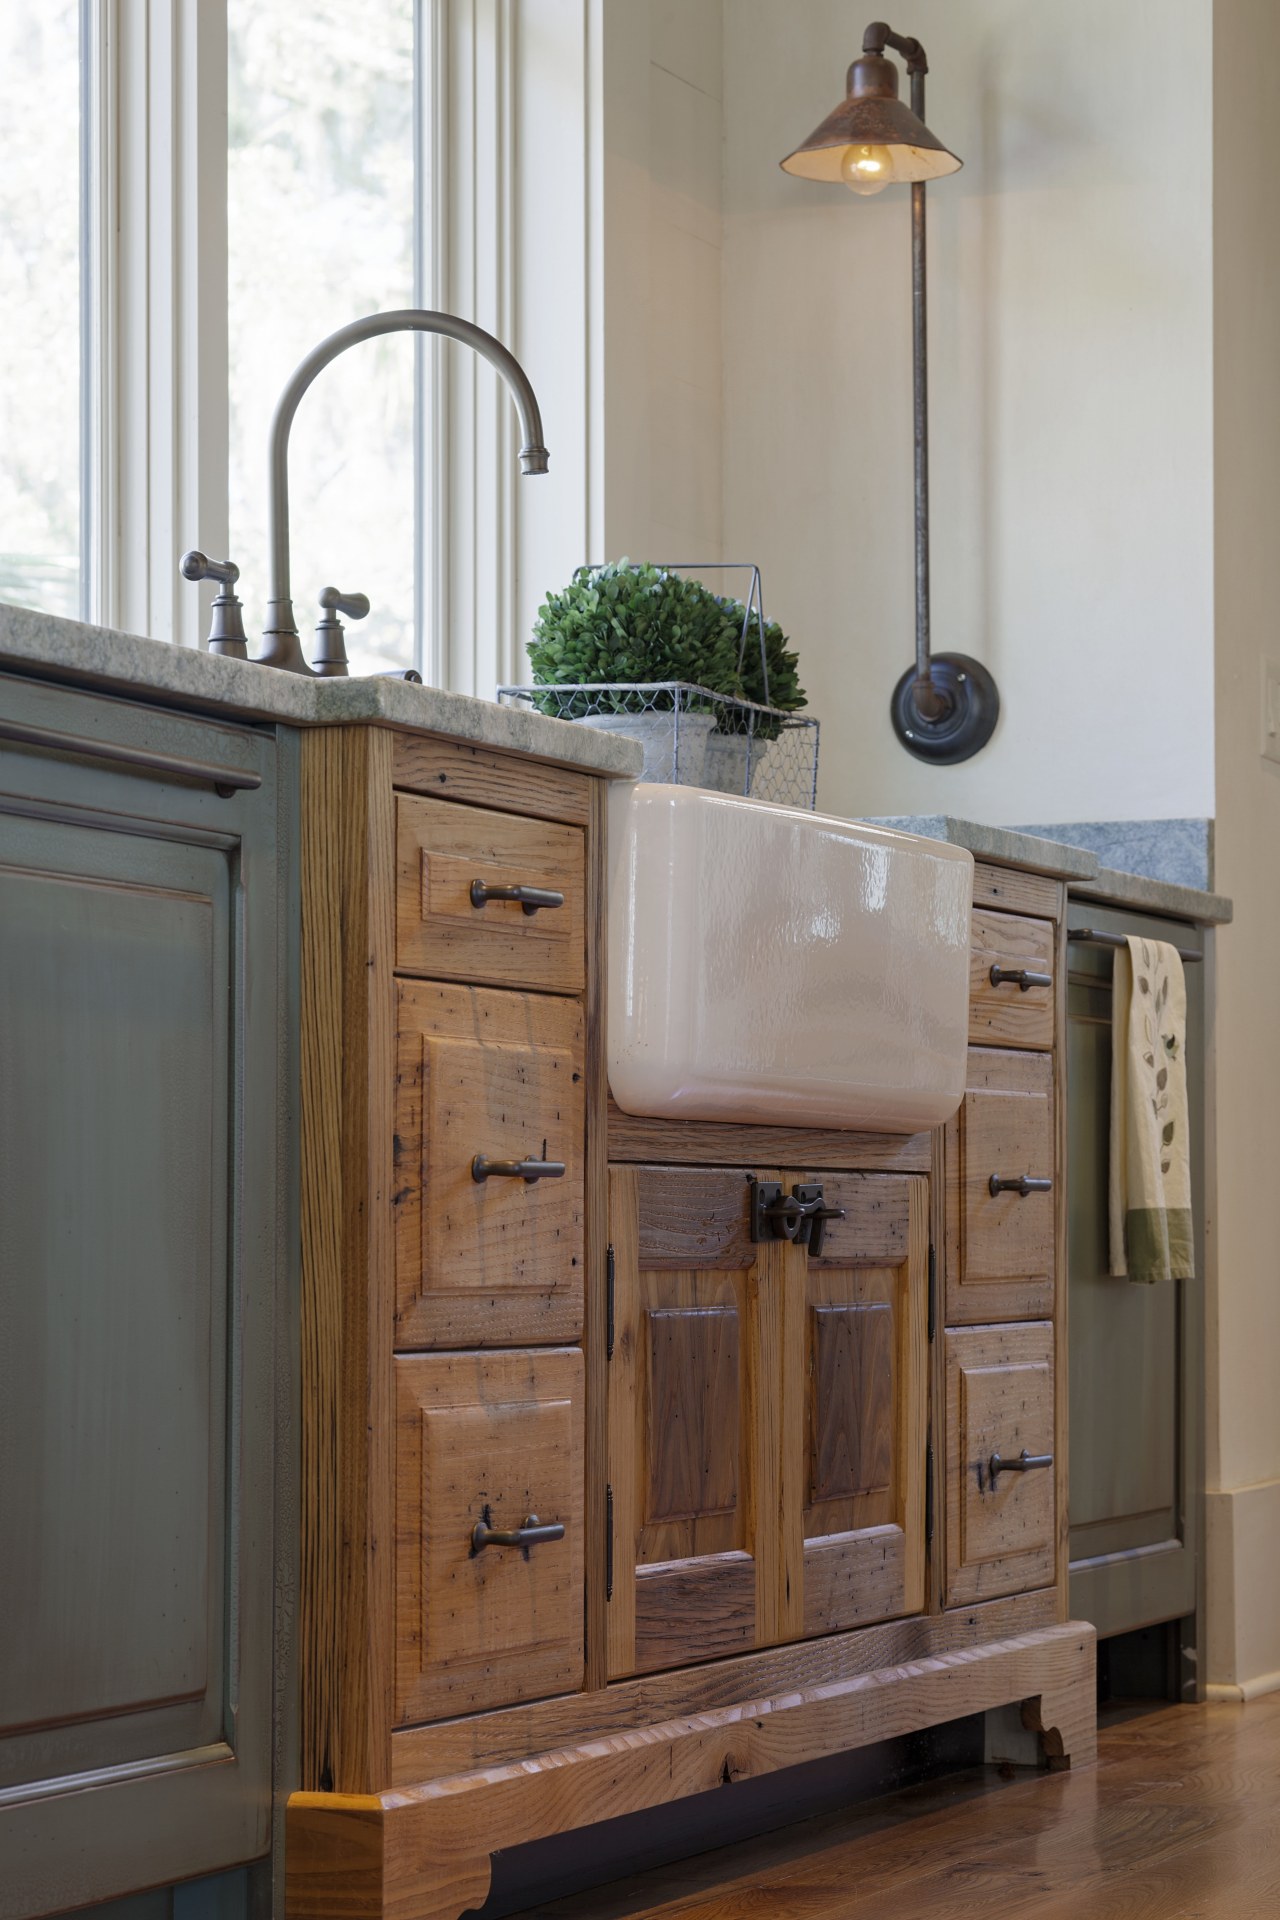 This sink cabinet juts out into the room, bathroom, bathroom accessory, bathroom cabinet, cabinetry, chest of drawers, countertop, cuisine classique, drawer, floor, furniture, hardwood, kitchen, room, sideboard, sink, wood, wood stain, gray, brown